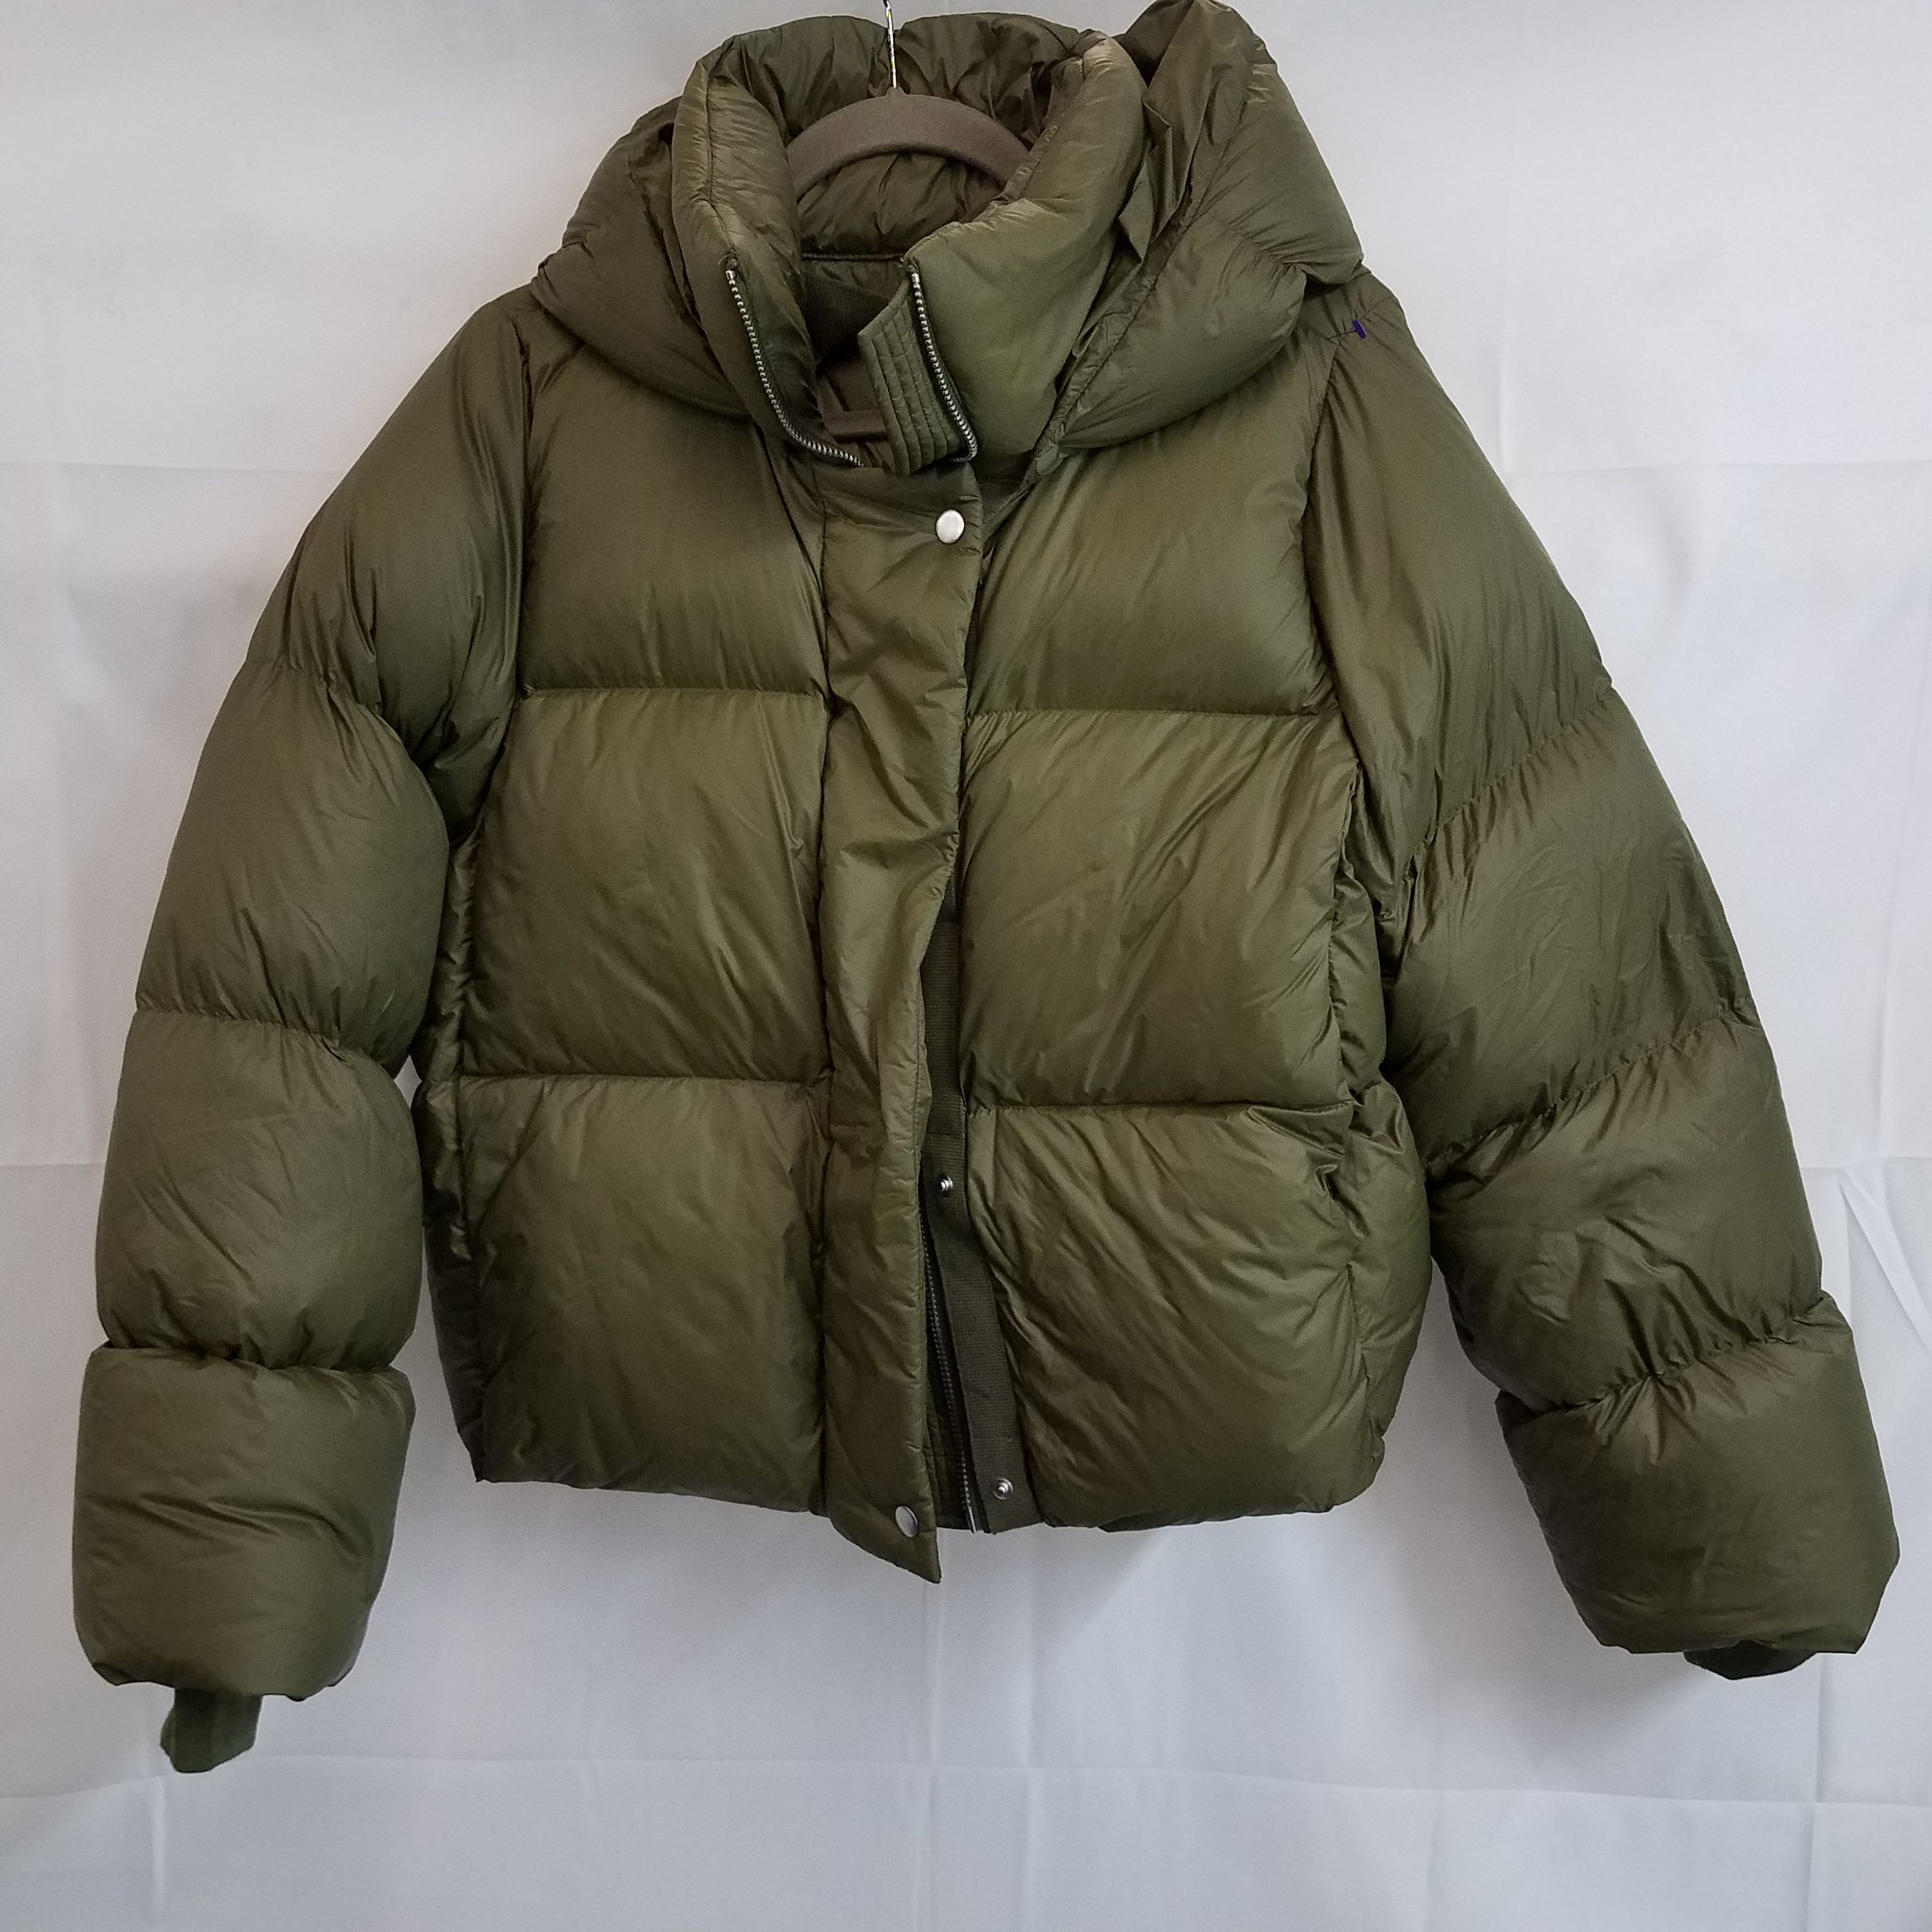 Buy the Banana Republic short insulated olive green puffer